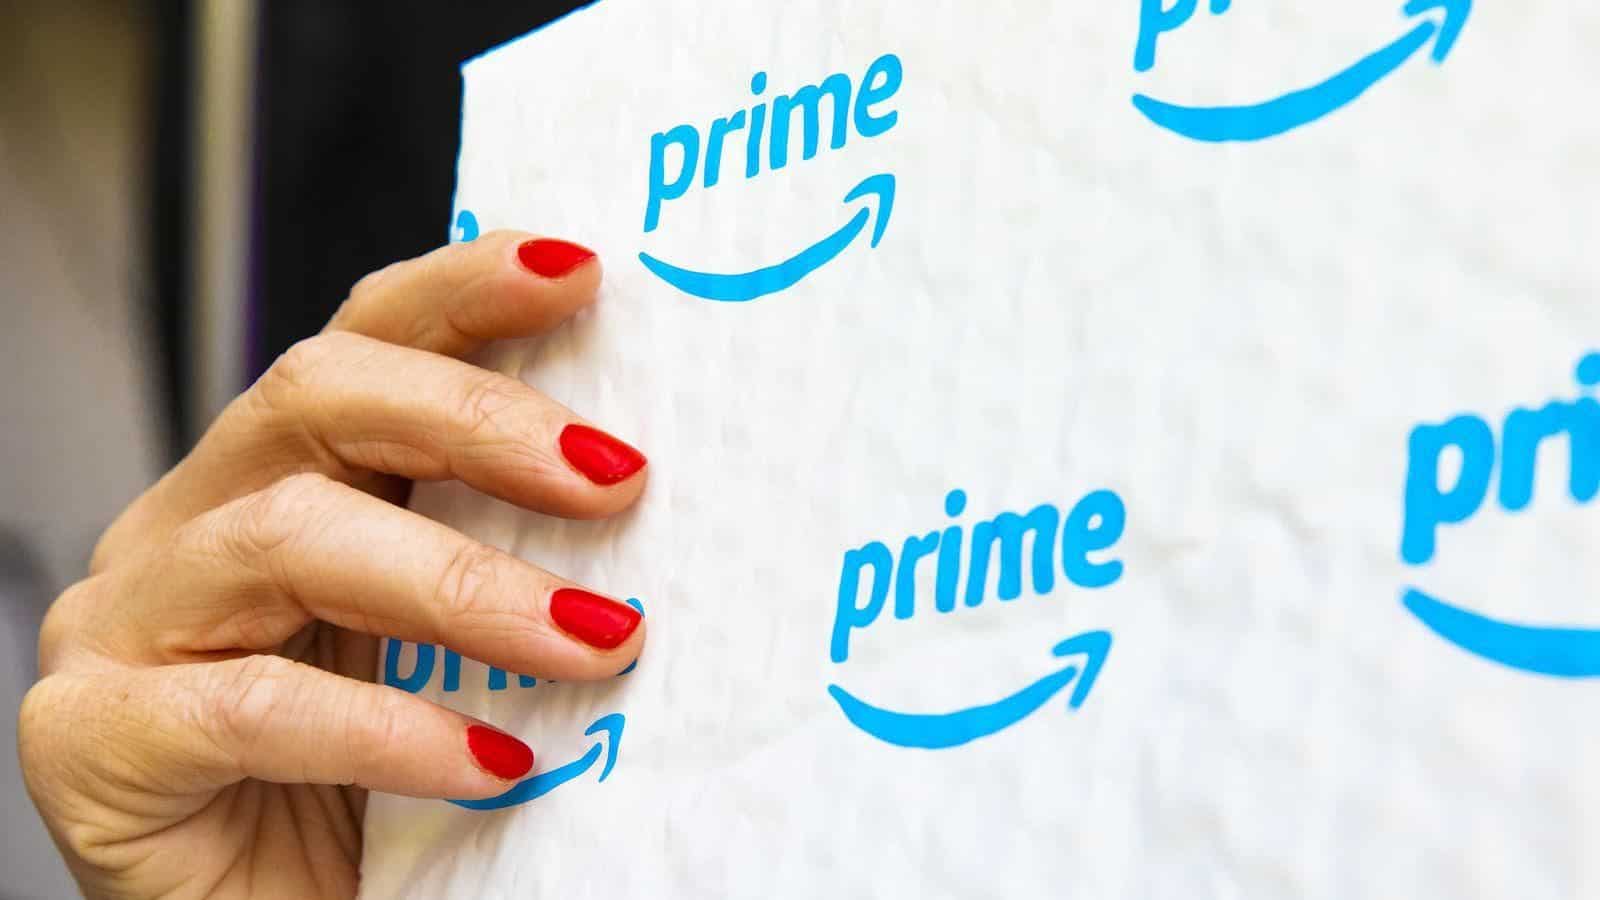 https://www.mistergadget.tech/wp-content/uploads/2019/06/cropped-amazon-prime-day-shipping-delivery-3479-1.jpg